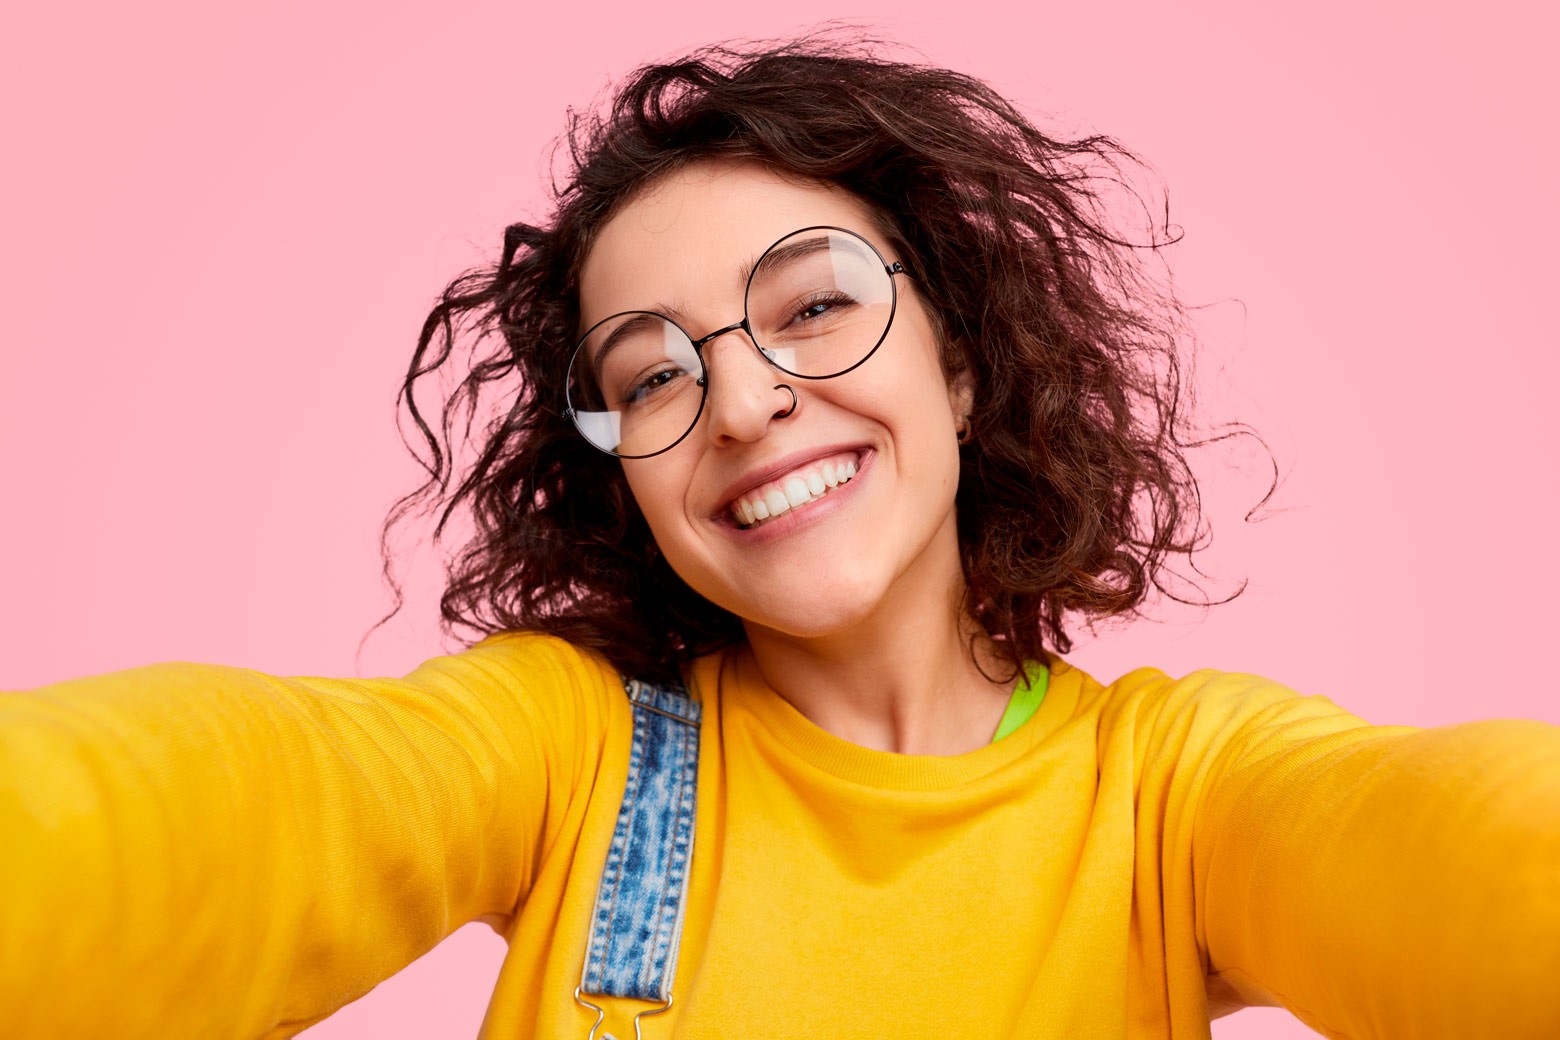 A woman with glasses is capturing her new look in a selfie on a pink background.